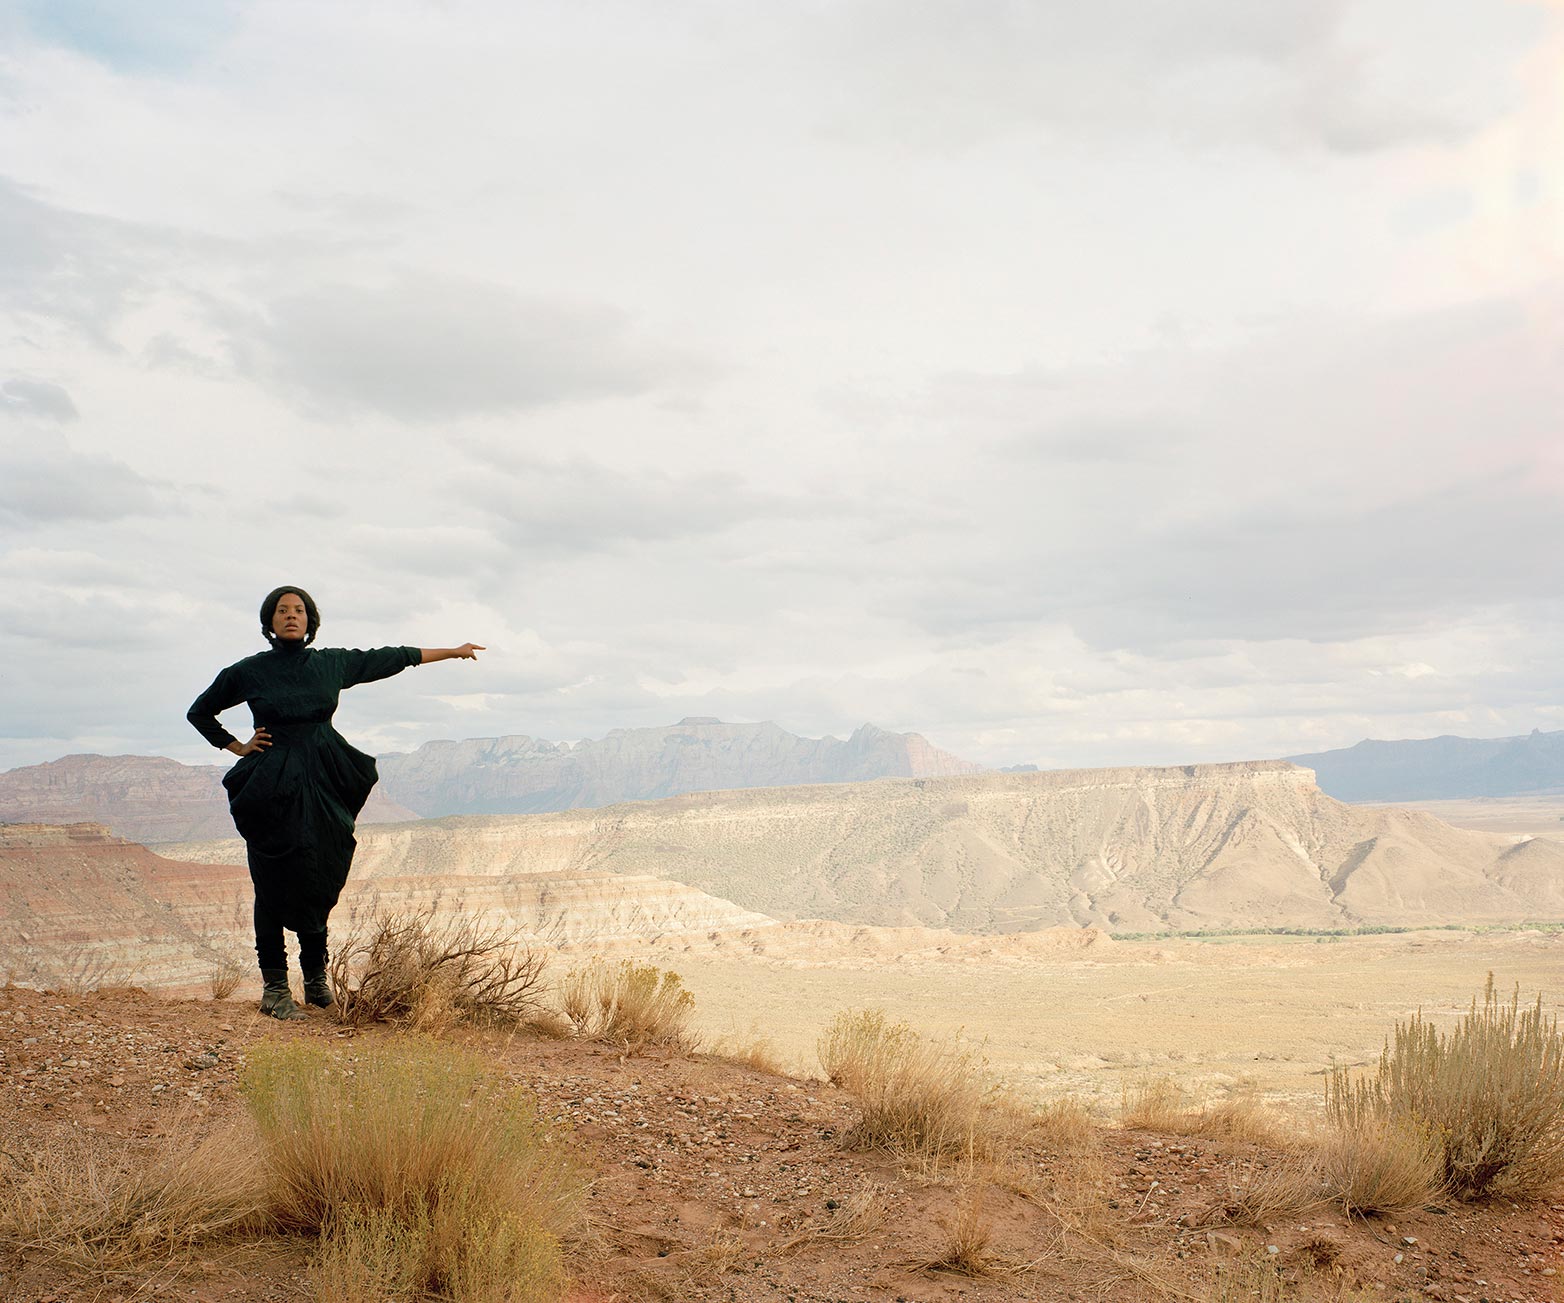 A person in a black dress stands on a desert vista pointing to the landscape against clouds and dusty mountains